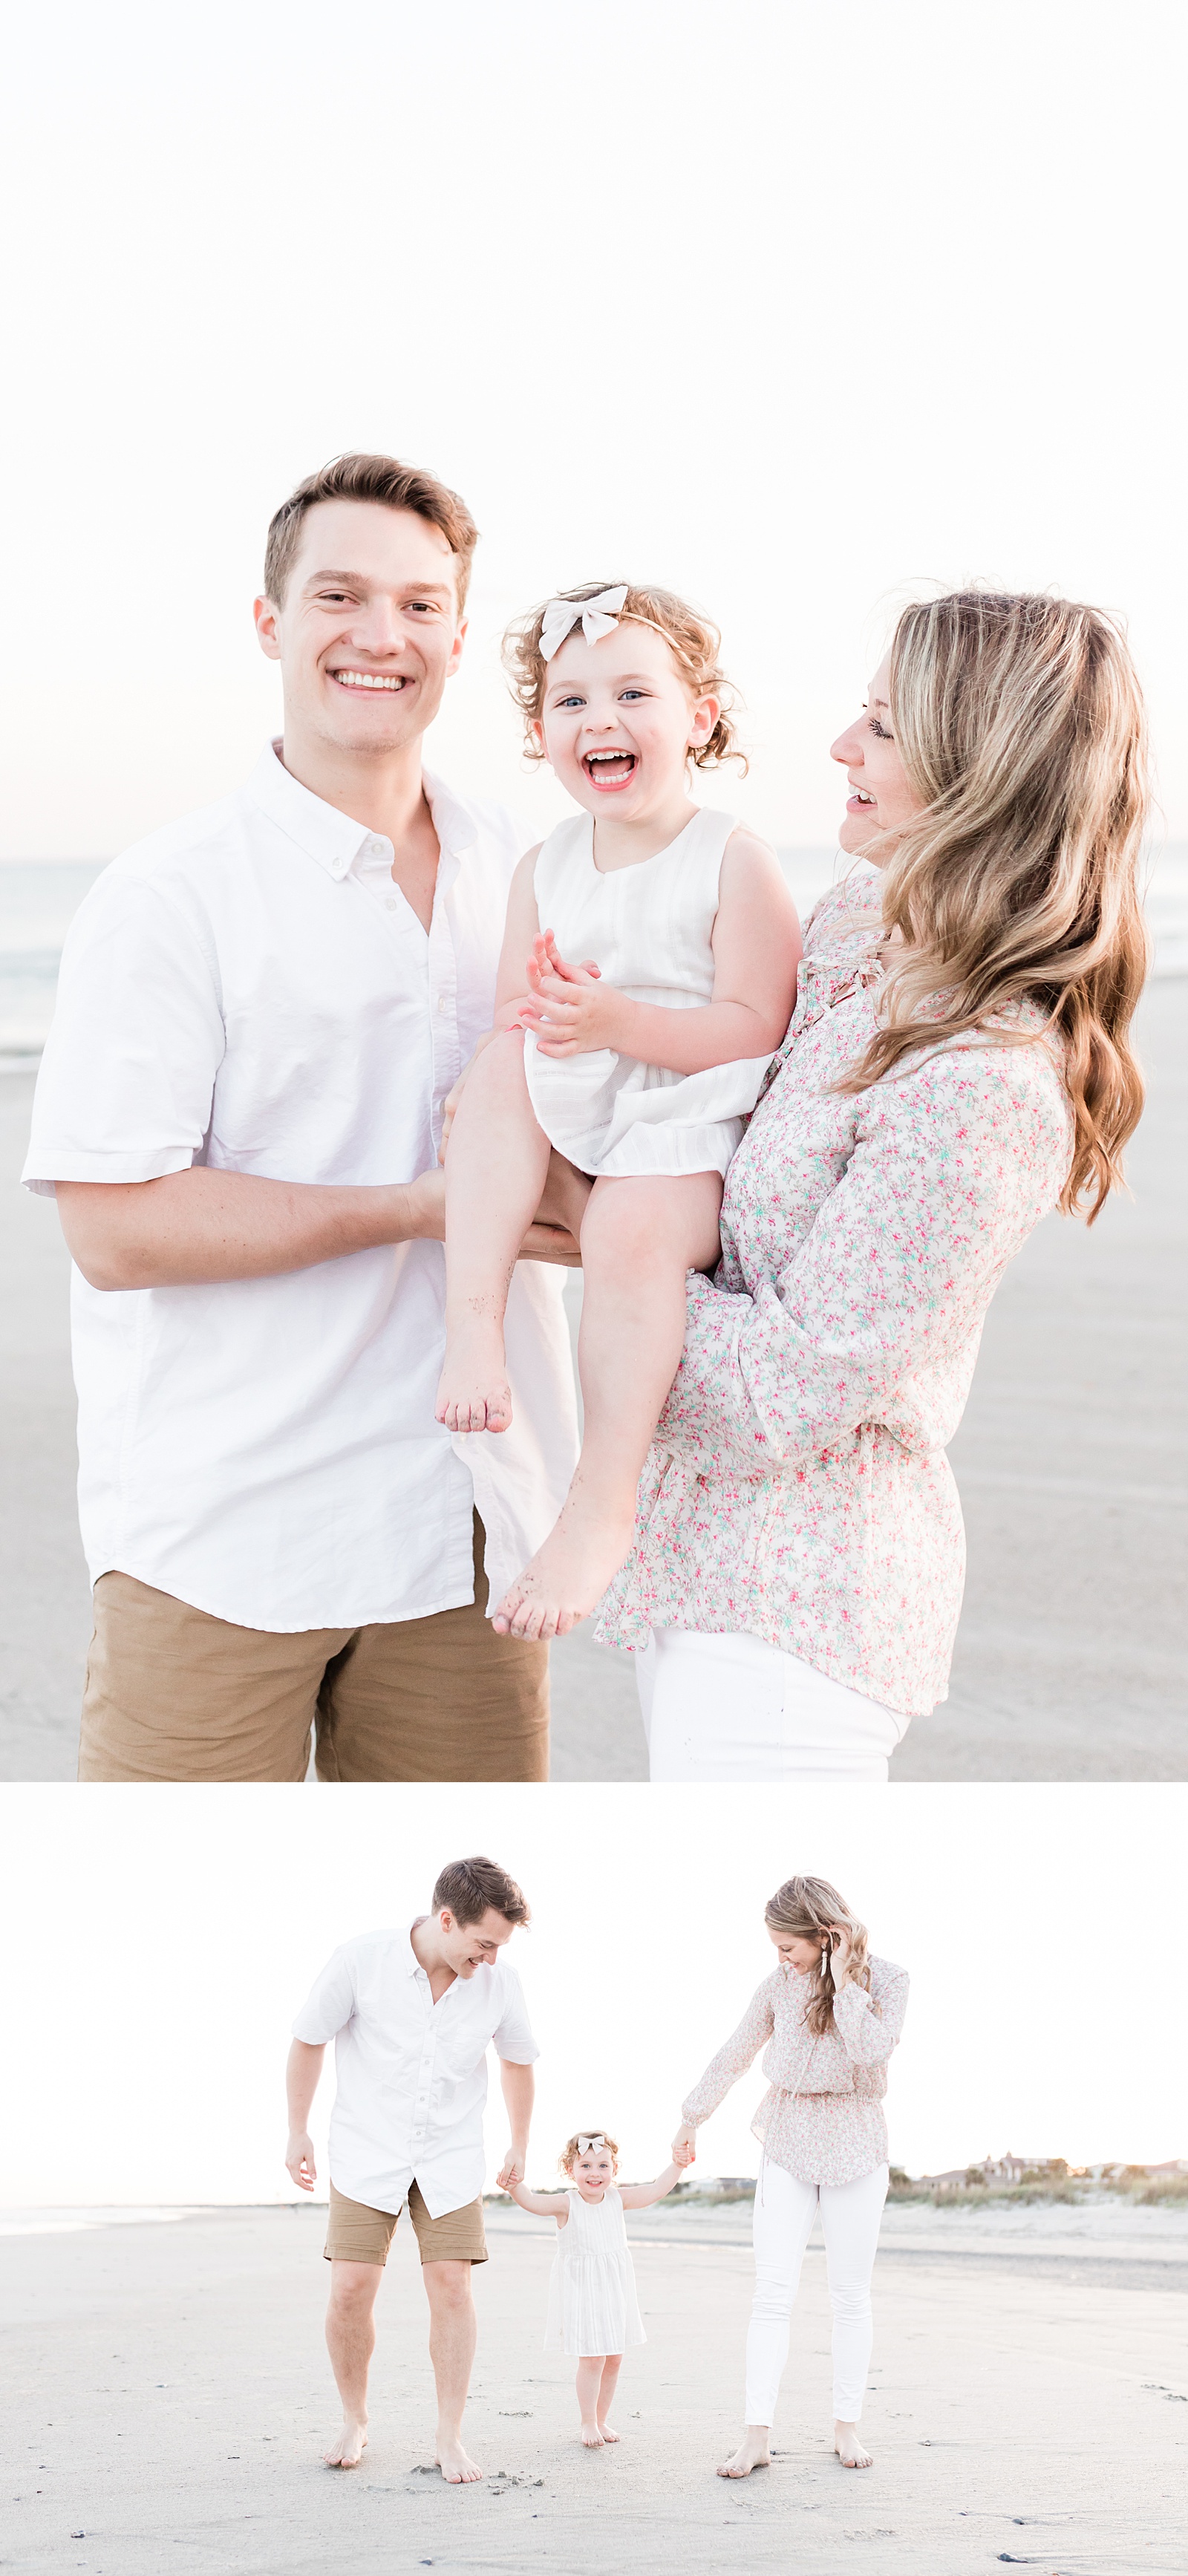 Toddler playing with family on beach during extended family session on Isle of Palms | Caitlyn Motycka Photography